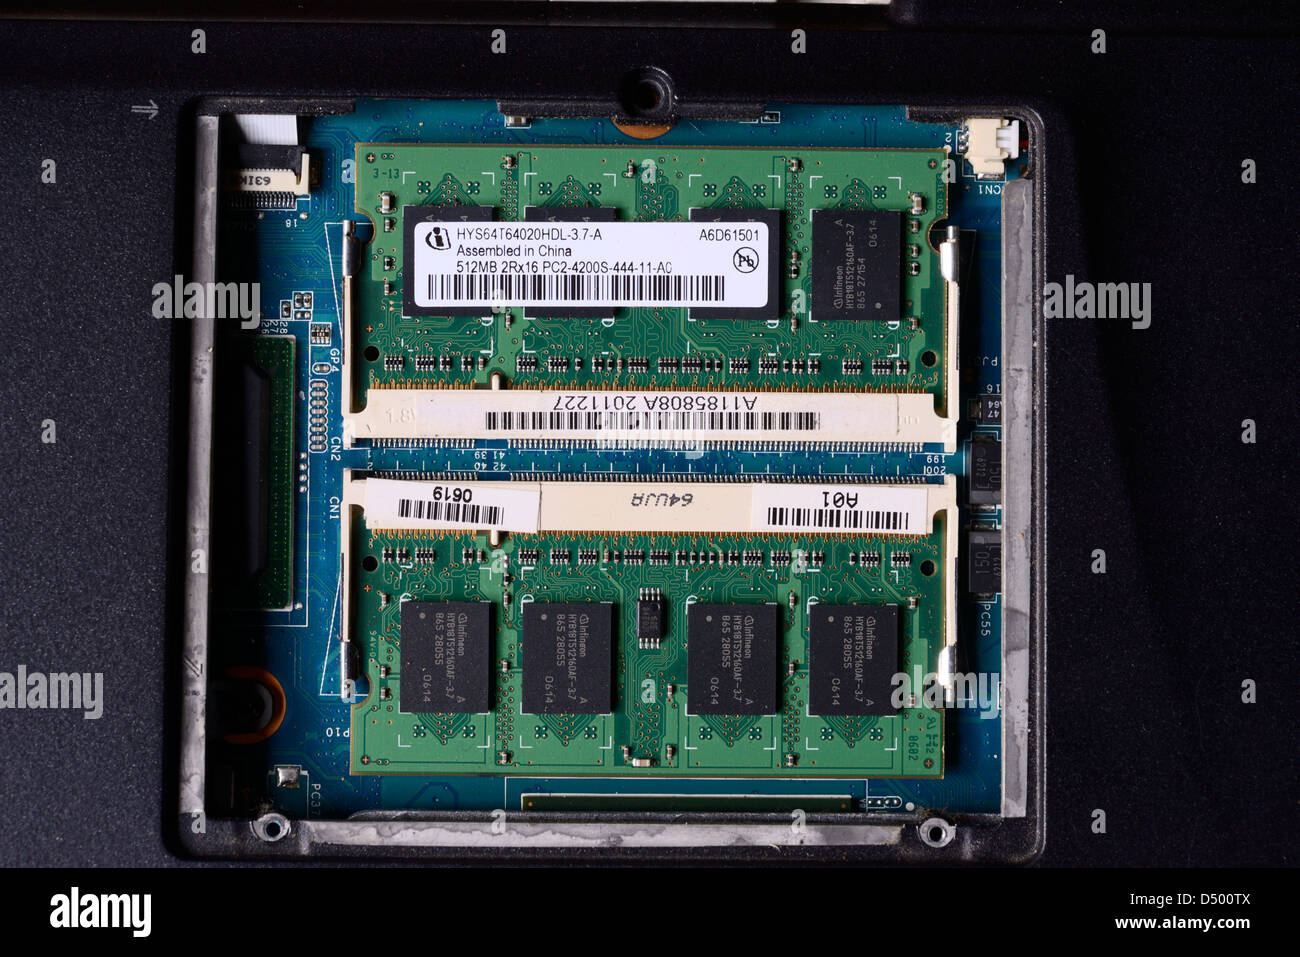 Random Access Memory or RAM inside a compartment within a laptop. Stock Photo